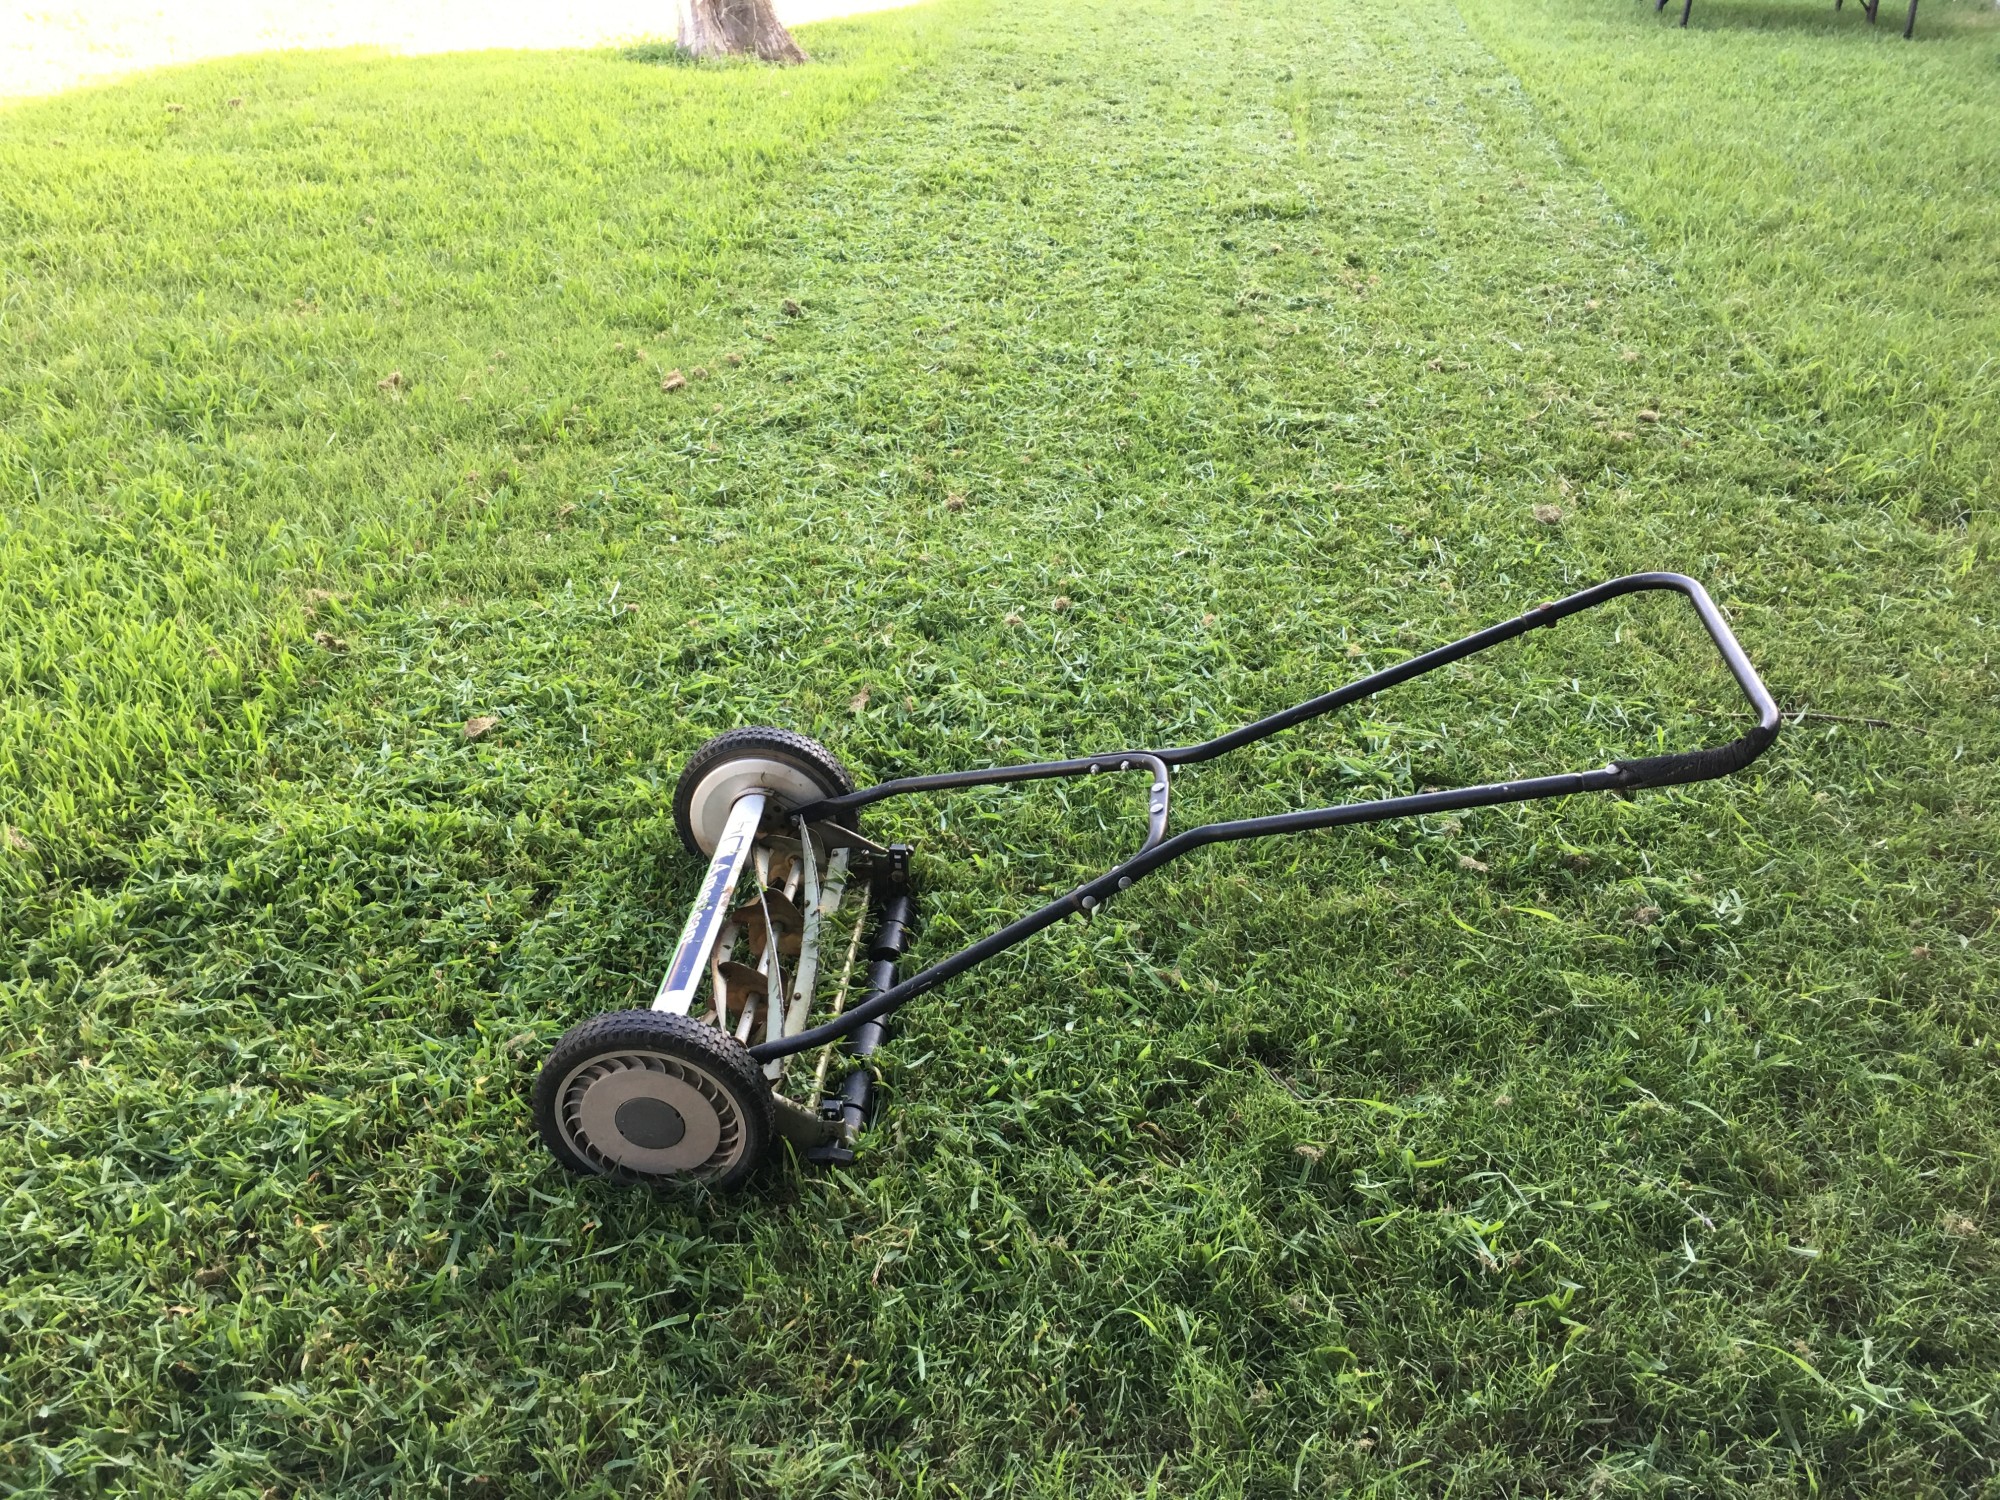 Lawn Trimming: Do’s and Don’ts